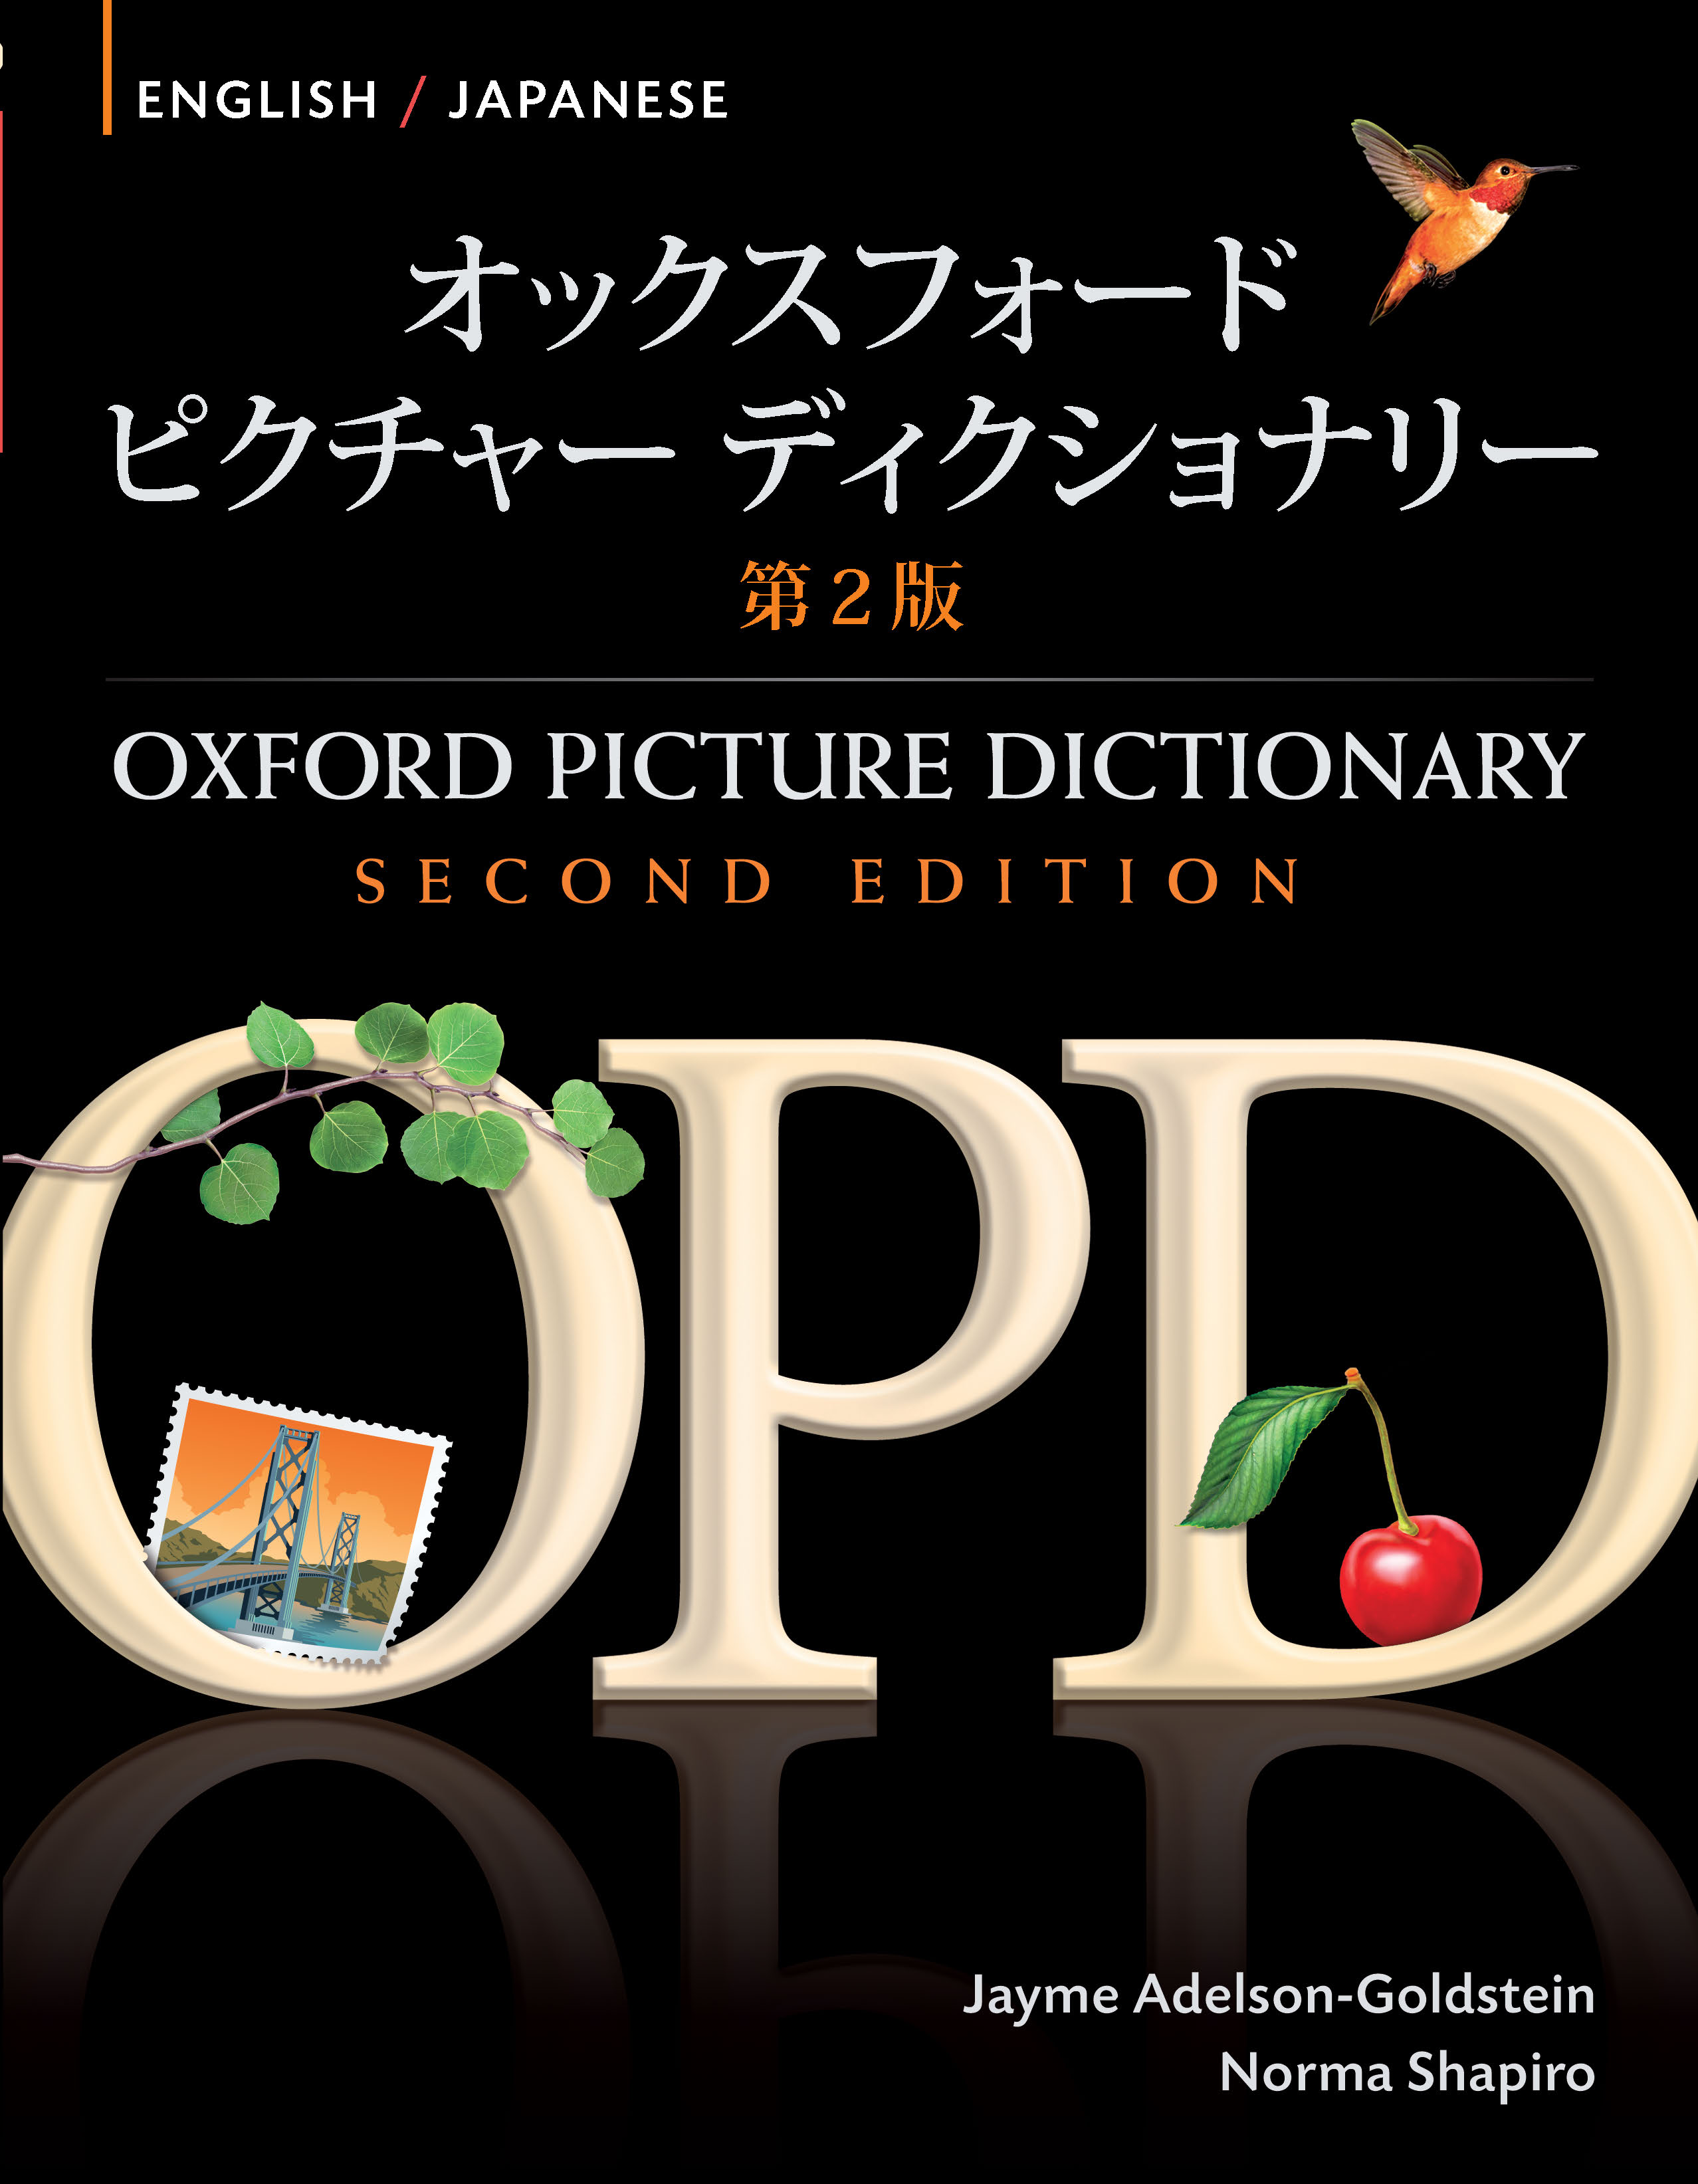 Oxford Picture Dictionary English-Japanese Edition: Bilingual Dictionary .....